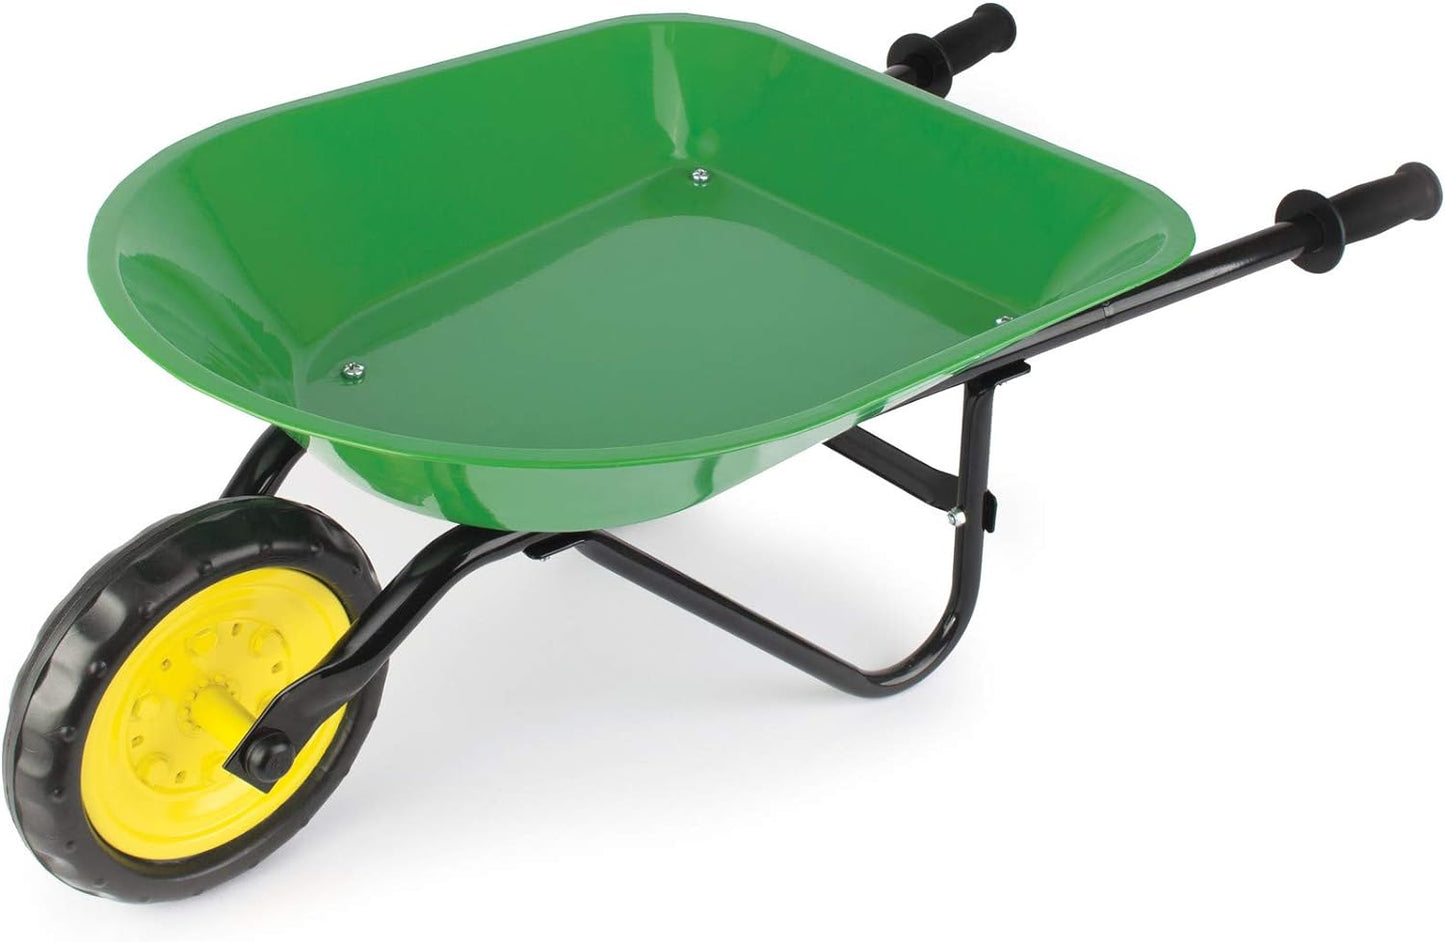 Kids Wheelbarrow - 34 Inch - Kids Gardening Tools -  Toys - Ages 2 Years and Up